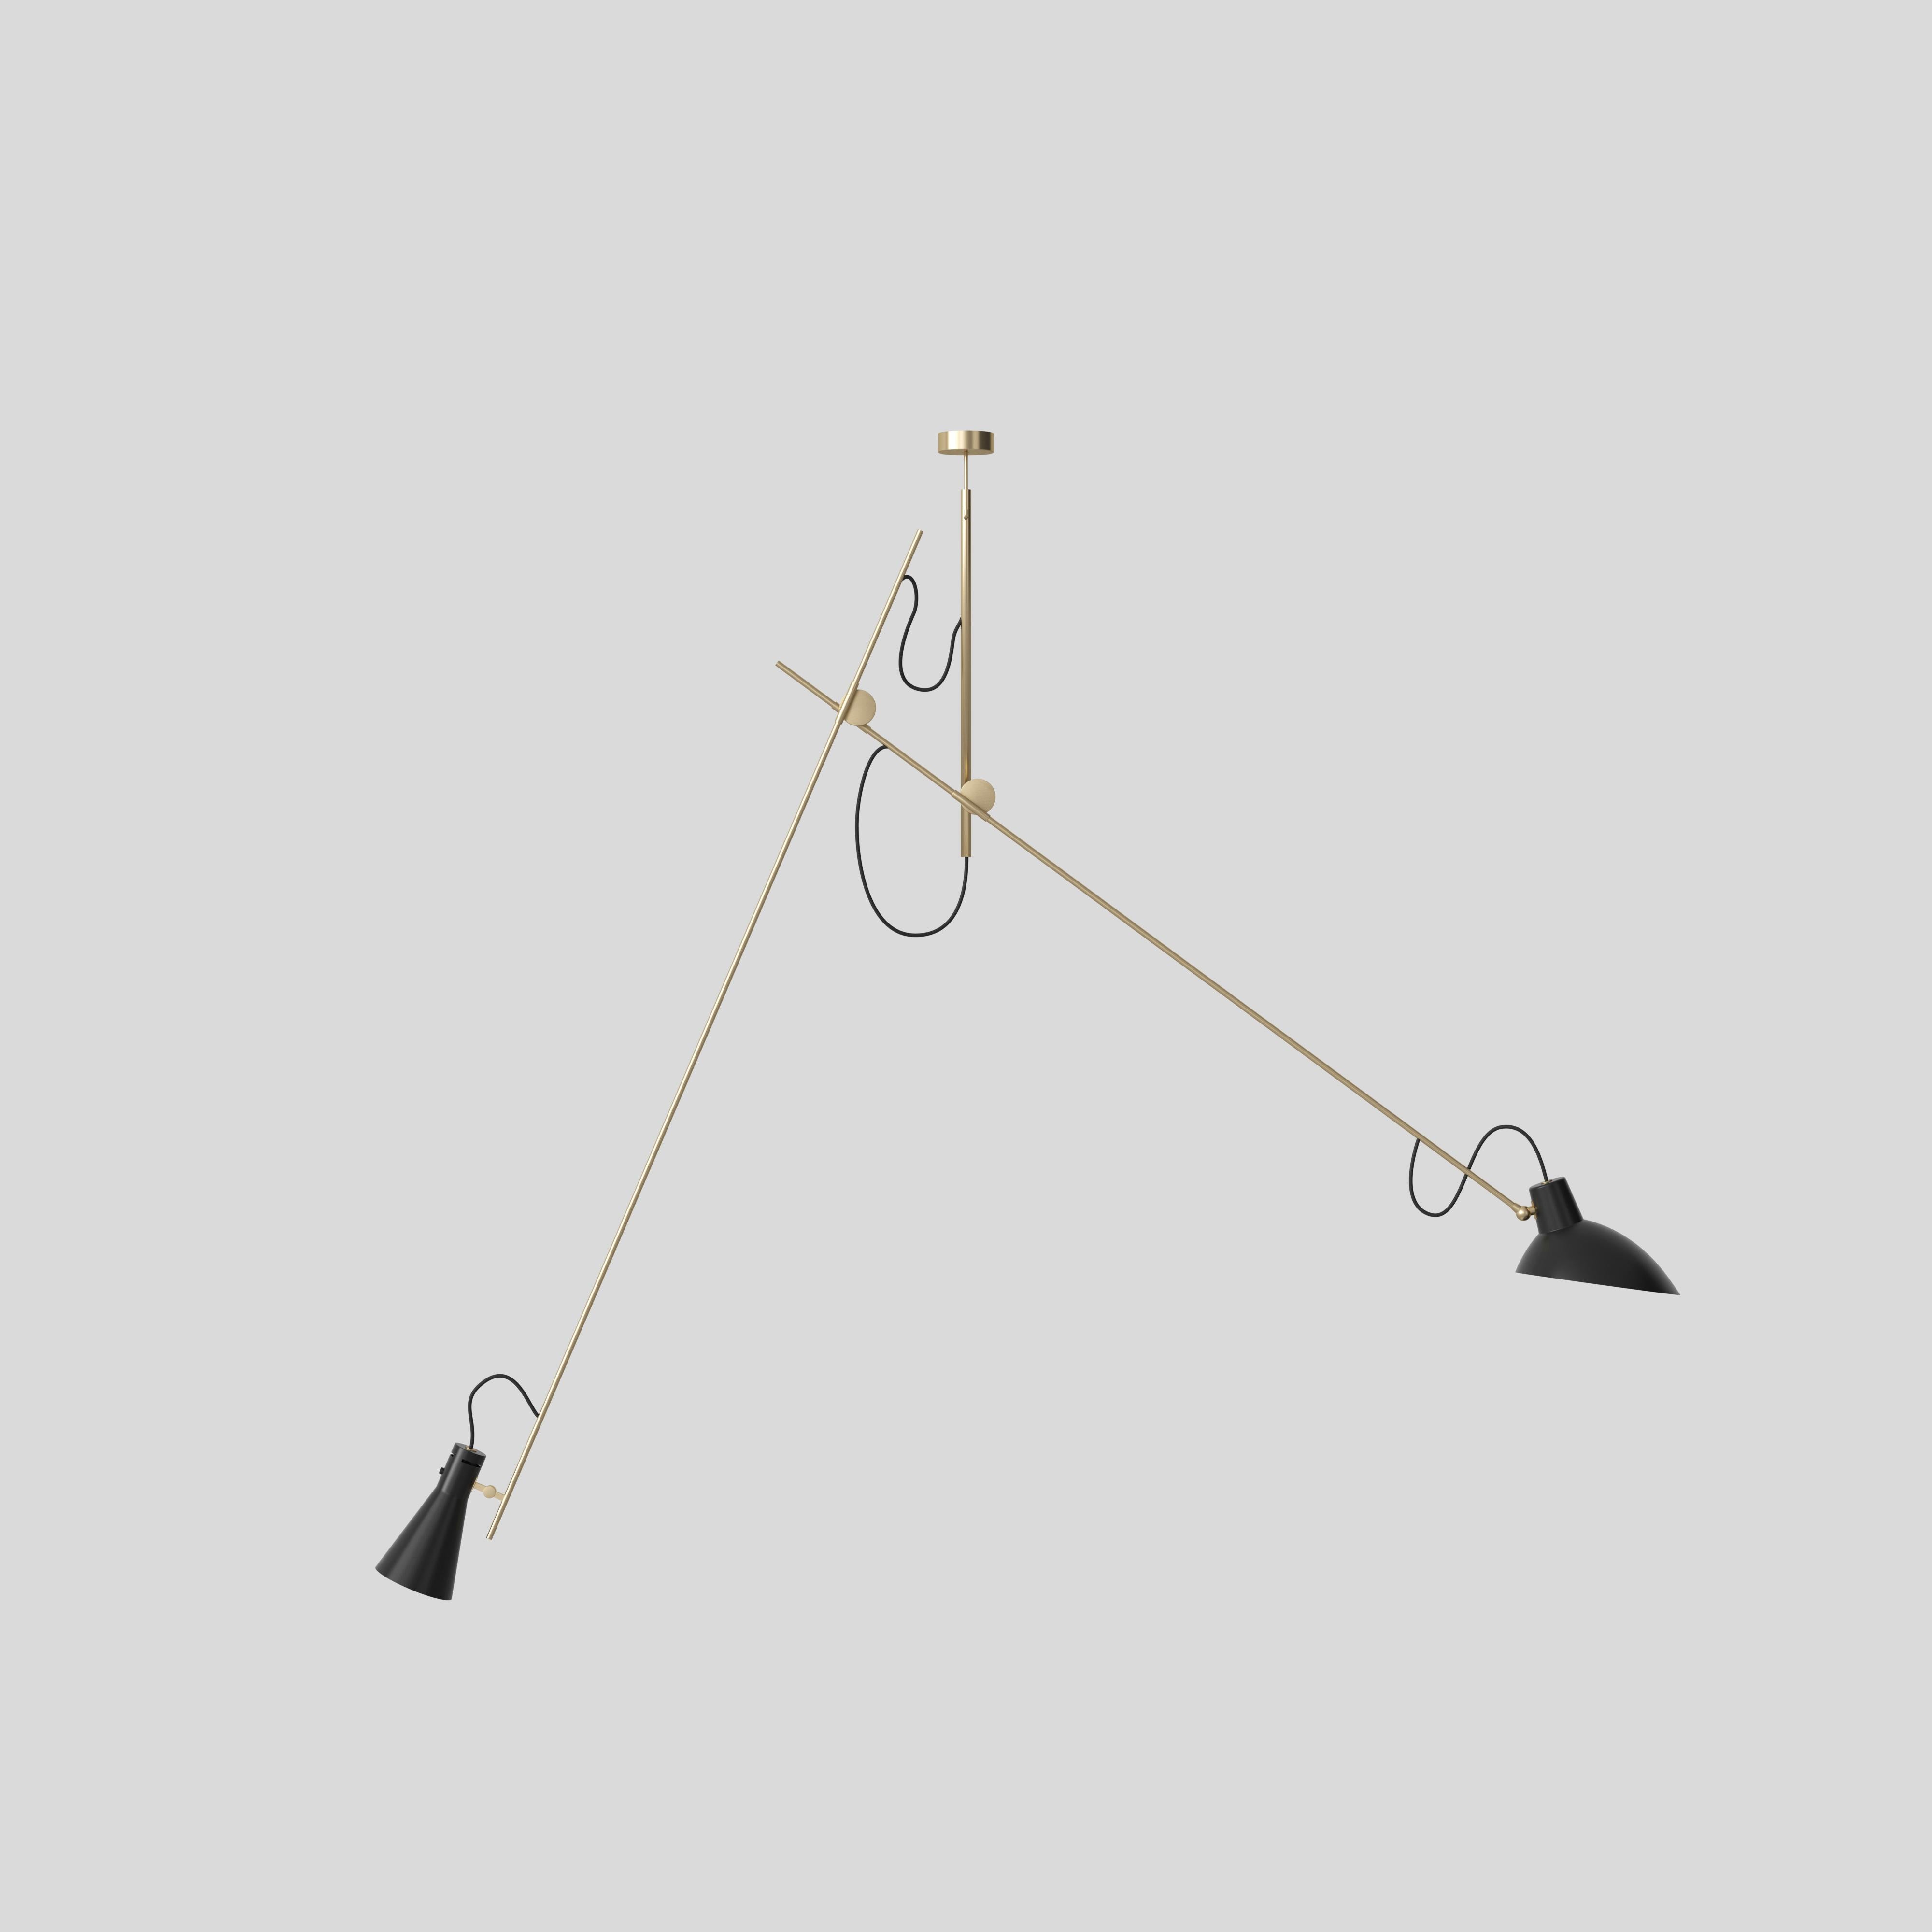 VV Cinquanta suspension lamp
Design by Vittoriano Vigano
This version is with black and white lacquered reflector and brass frame.

The VV Cinquanta Suspension is elegant and versatile with two posable direct light sources.

With a distinctive